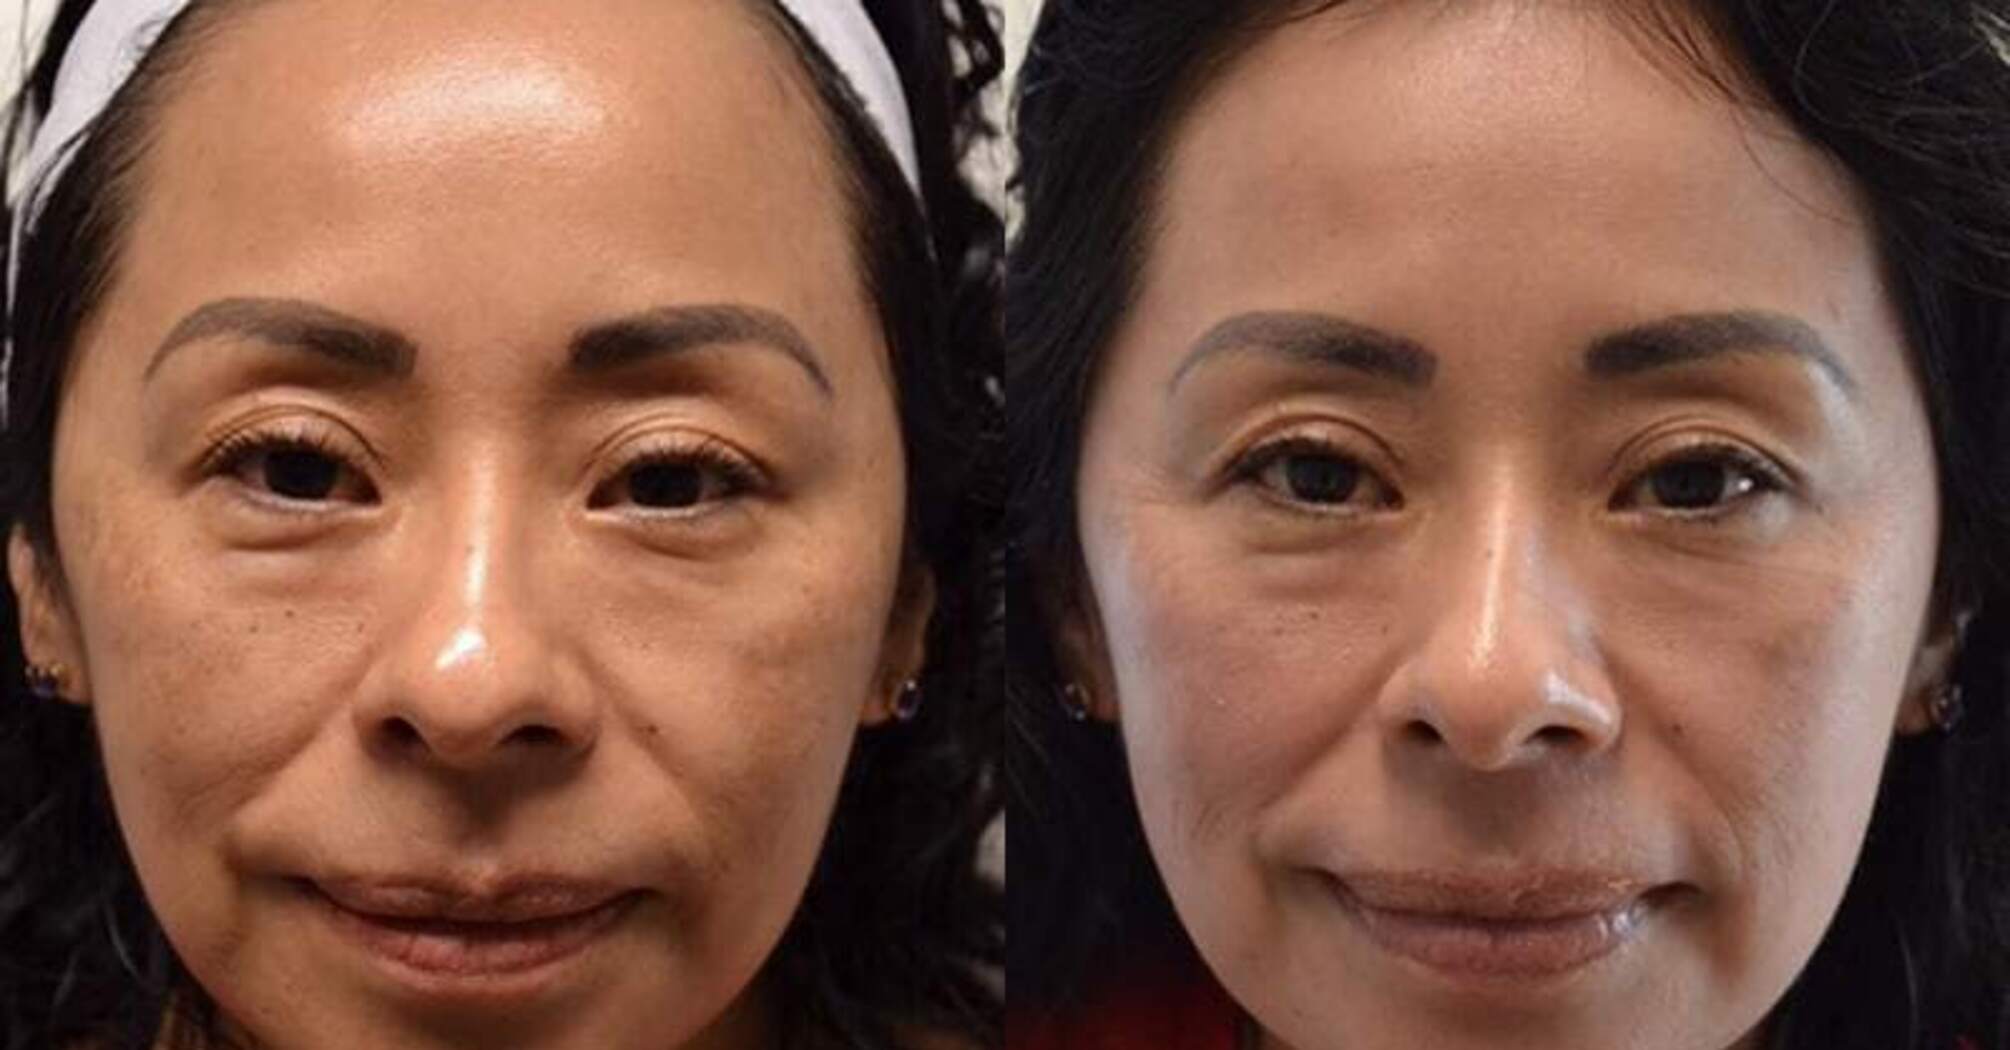 What is an acid peel for the face